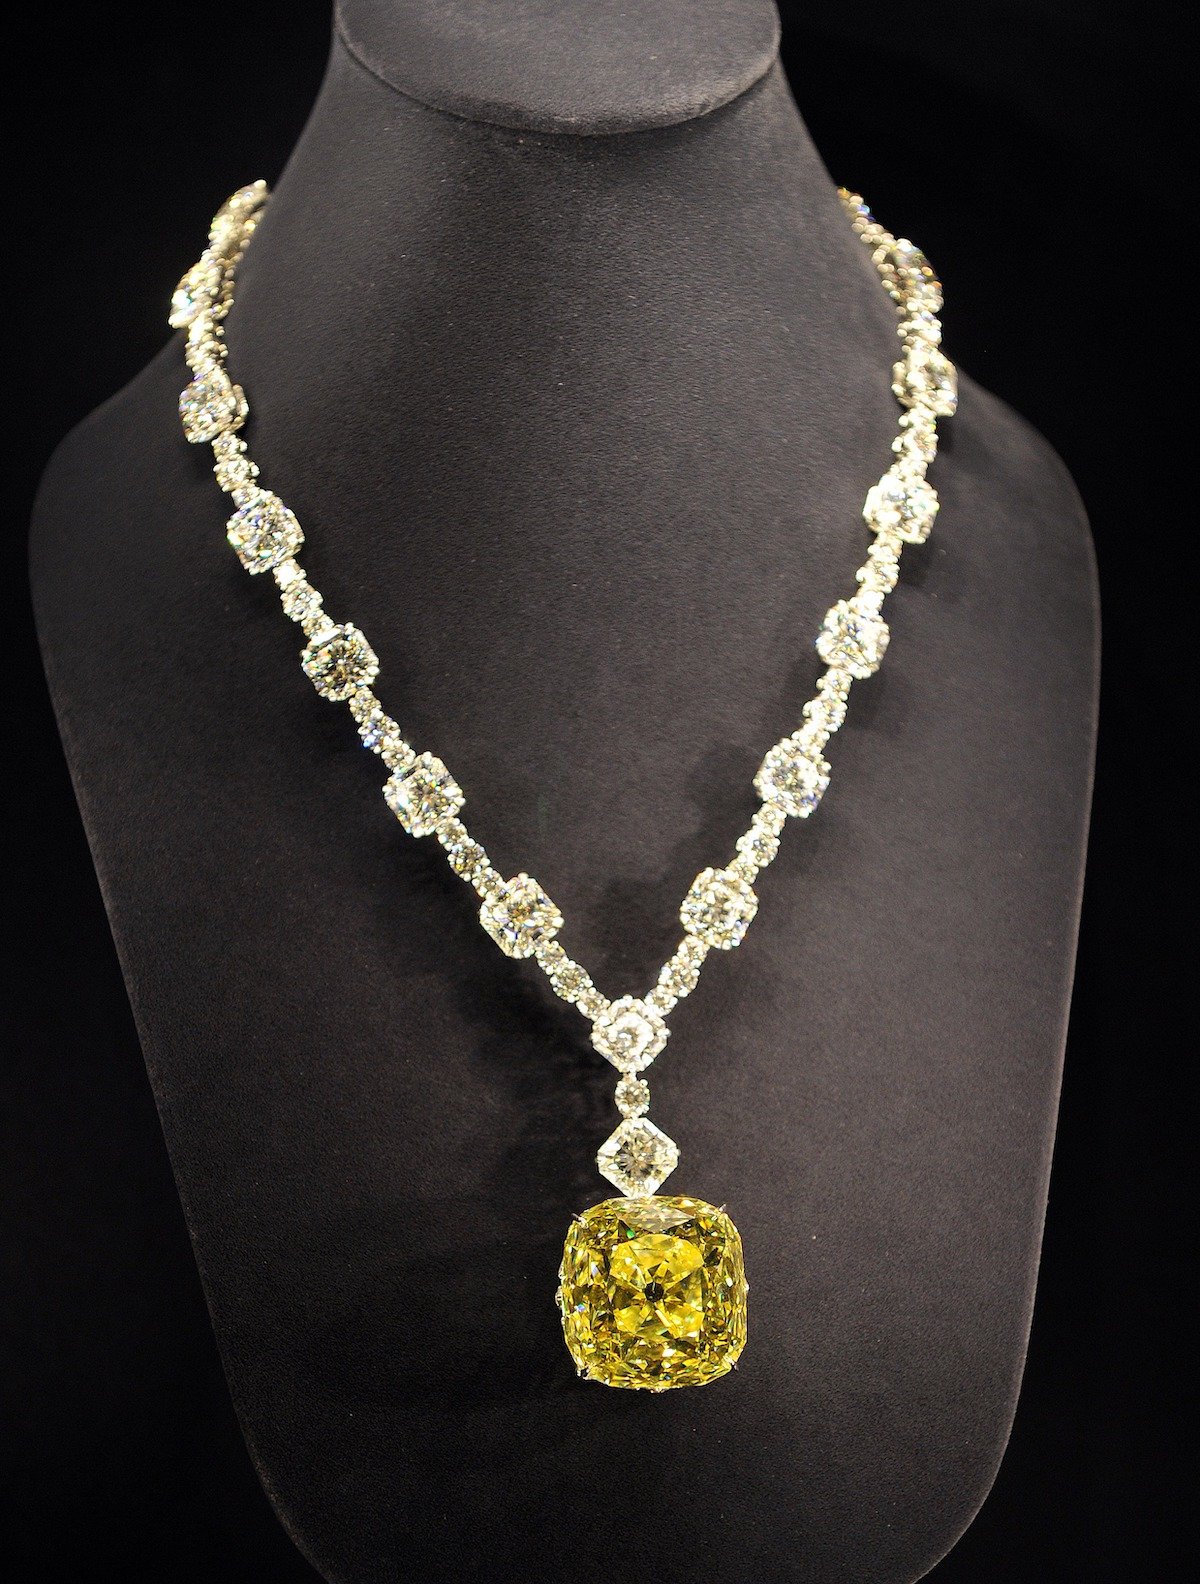 US luxury jeweler Tiffany displays a diamond necklace with a 128.54ct yellow diamond at a reception to celebrate Tiffany's 175th anniversary in Tokyo